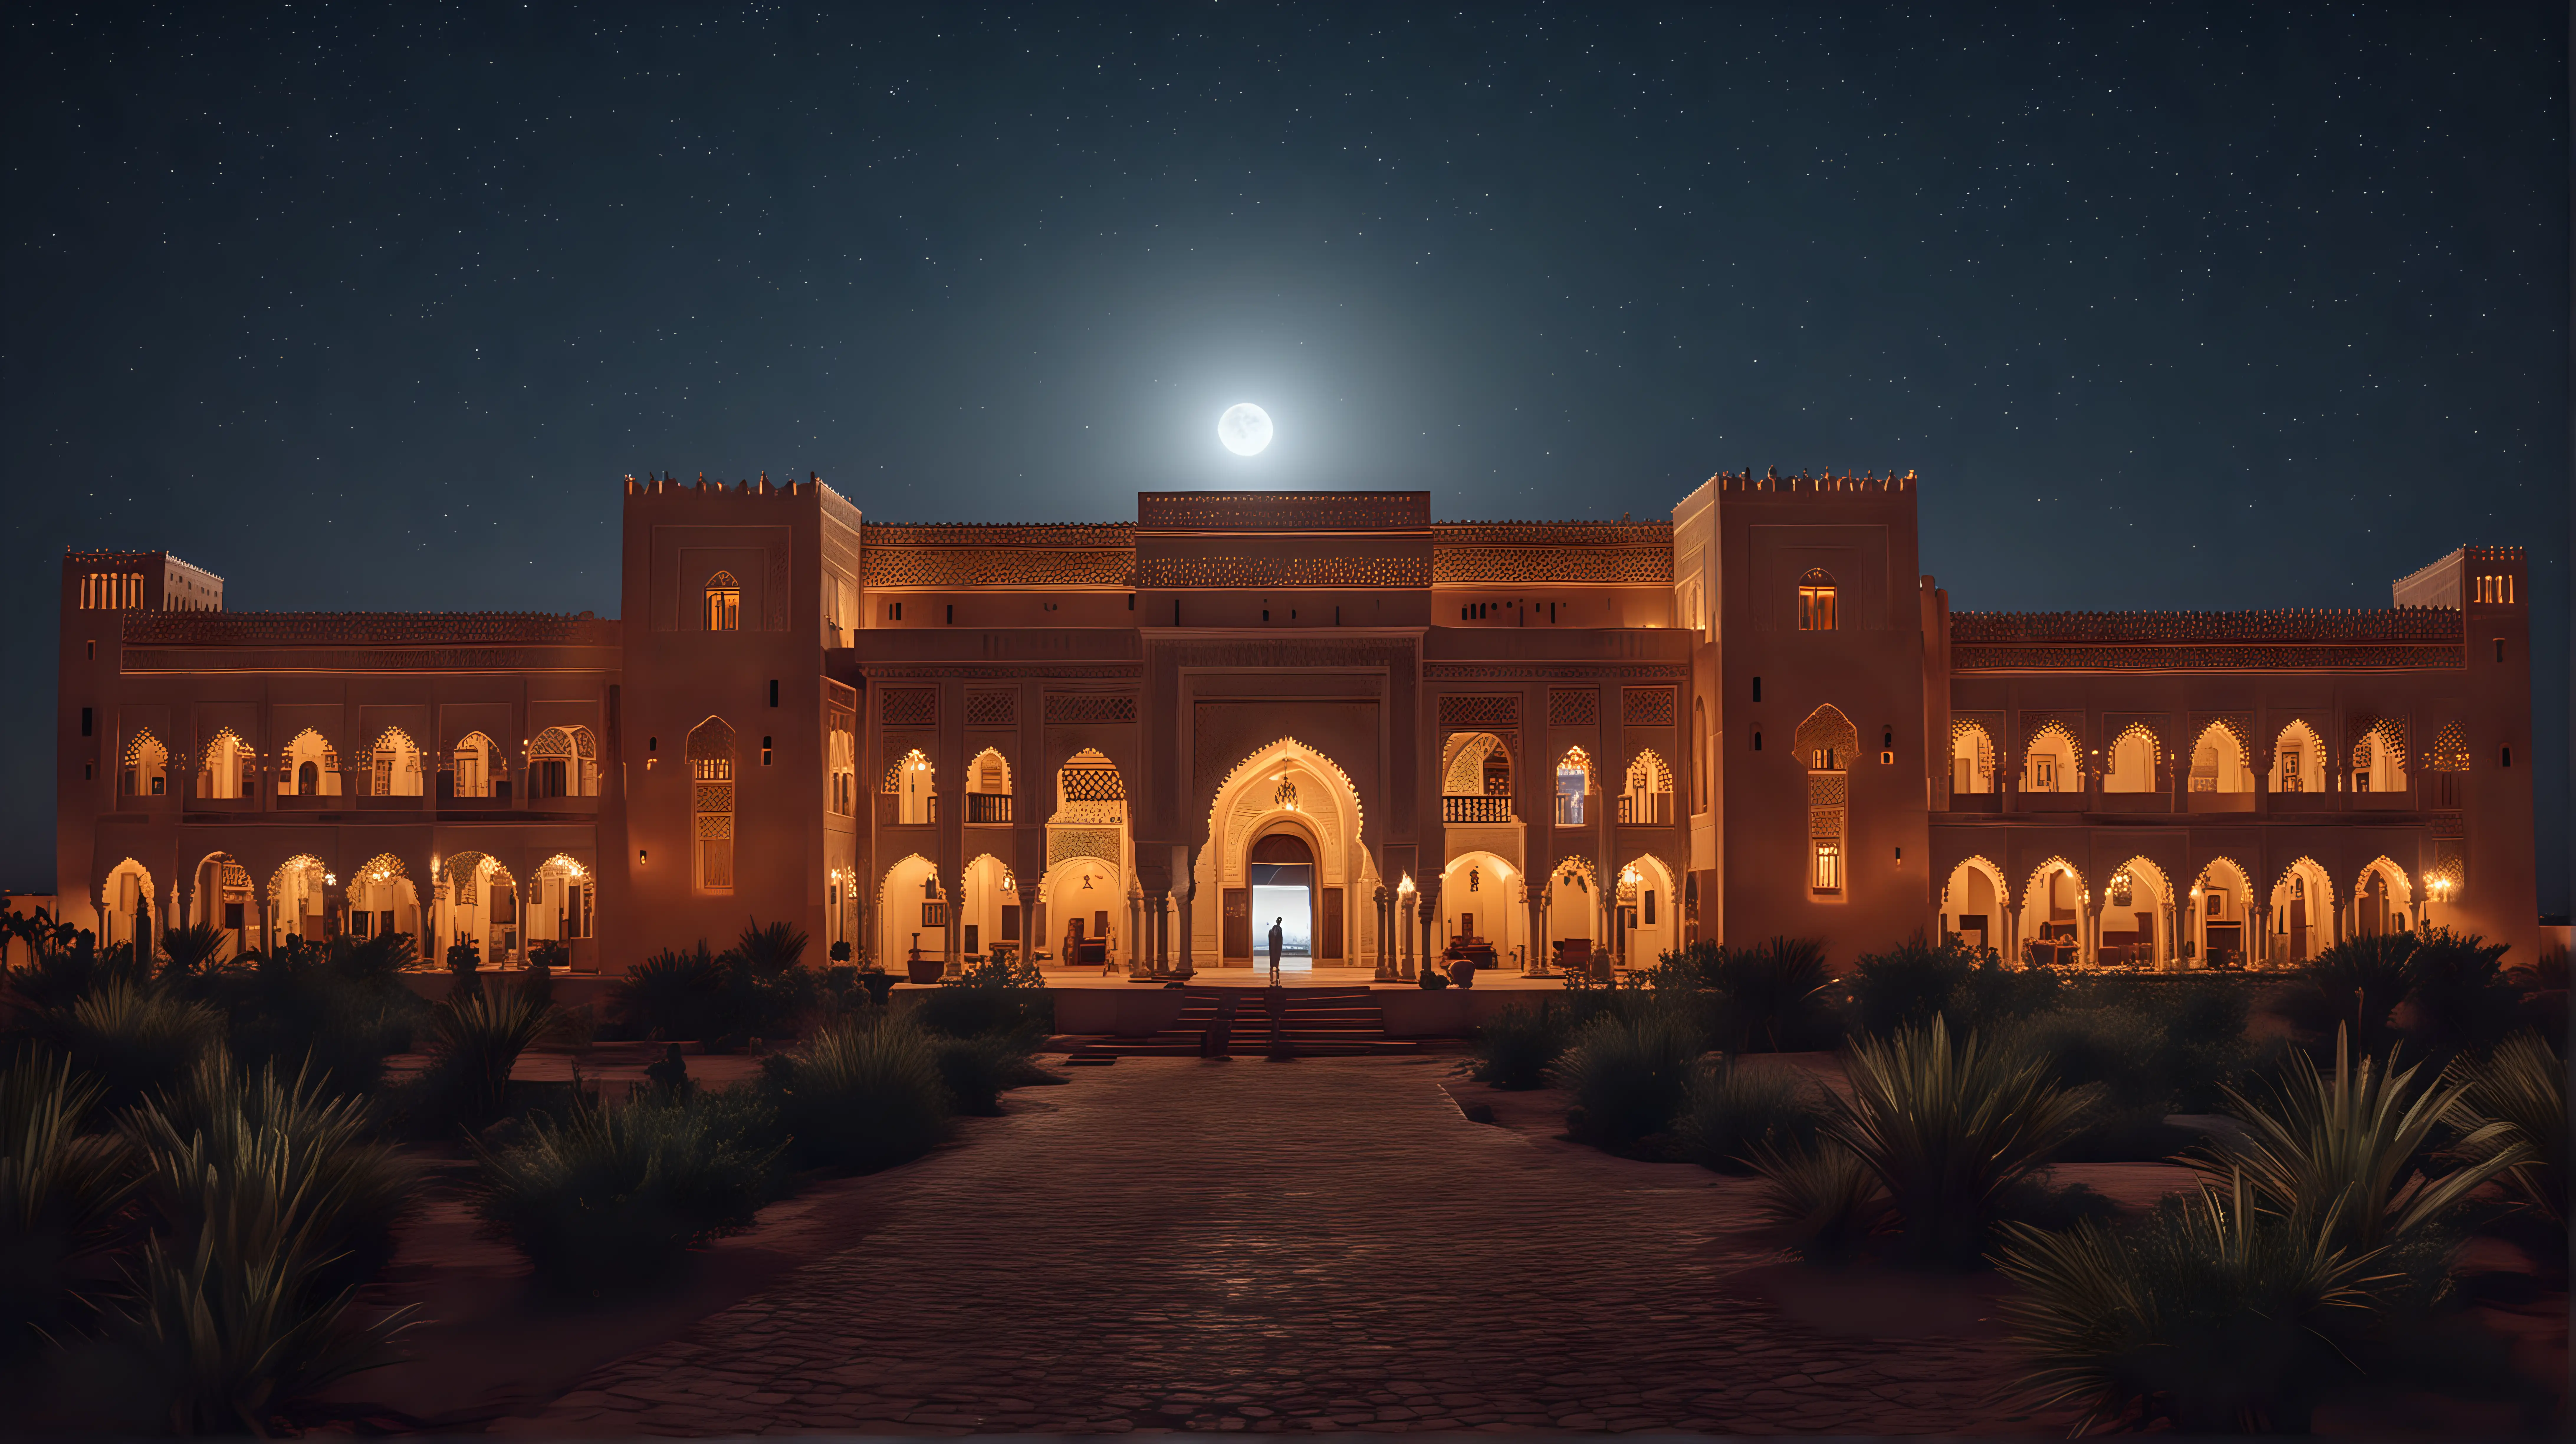 a Moroccan traditional palace, close view, night, full moon and star in the sky, vivid colors